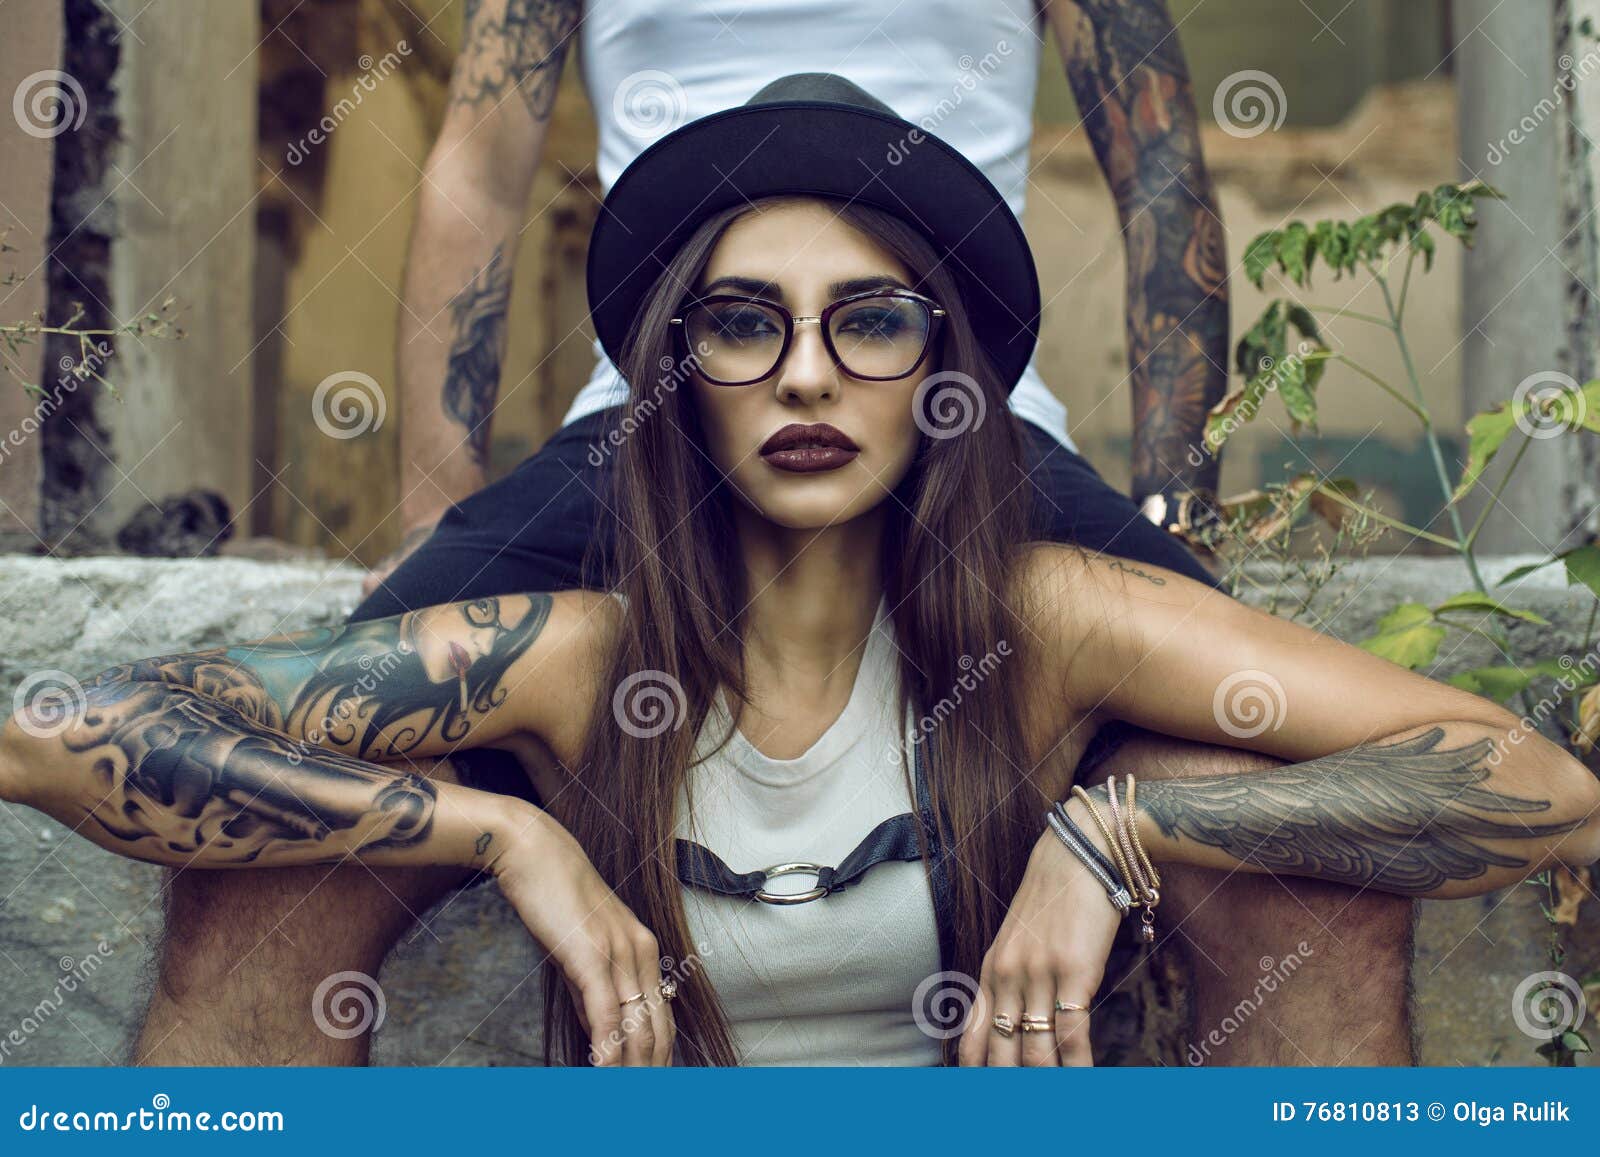 587 Gorgeous Tattooed Photos - Free & Royalty-Free Stock Photos from  Dreamstime